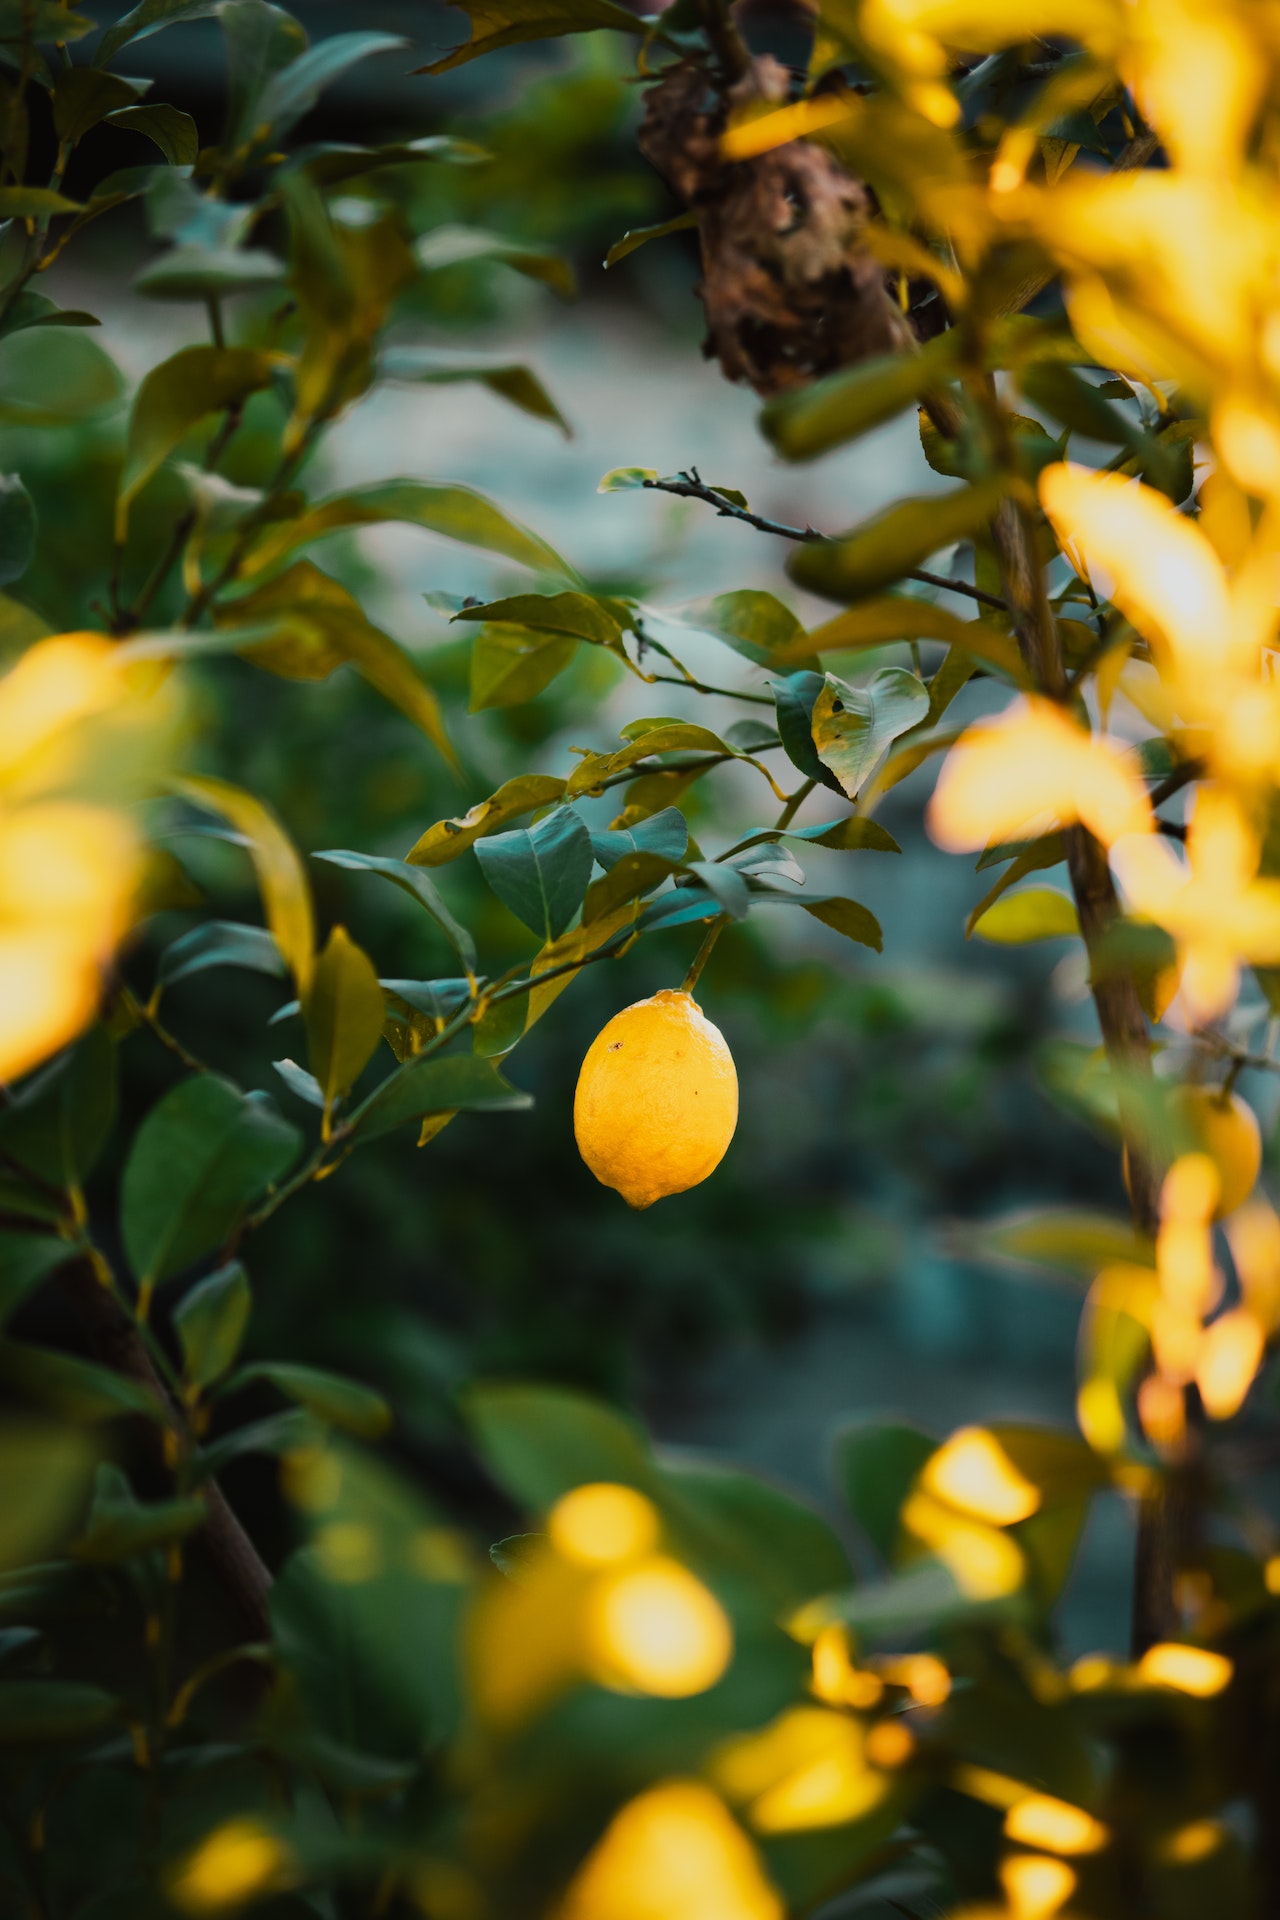 yuzu fruit is beneficial for health